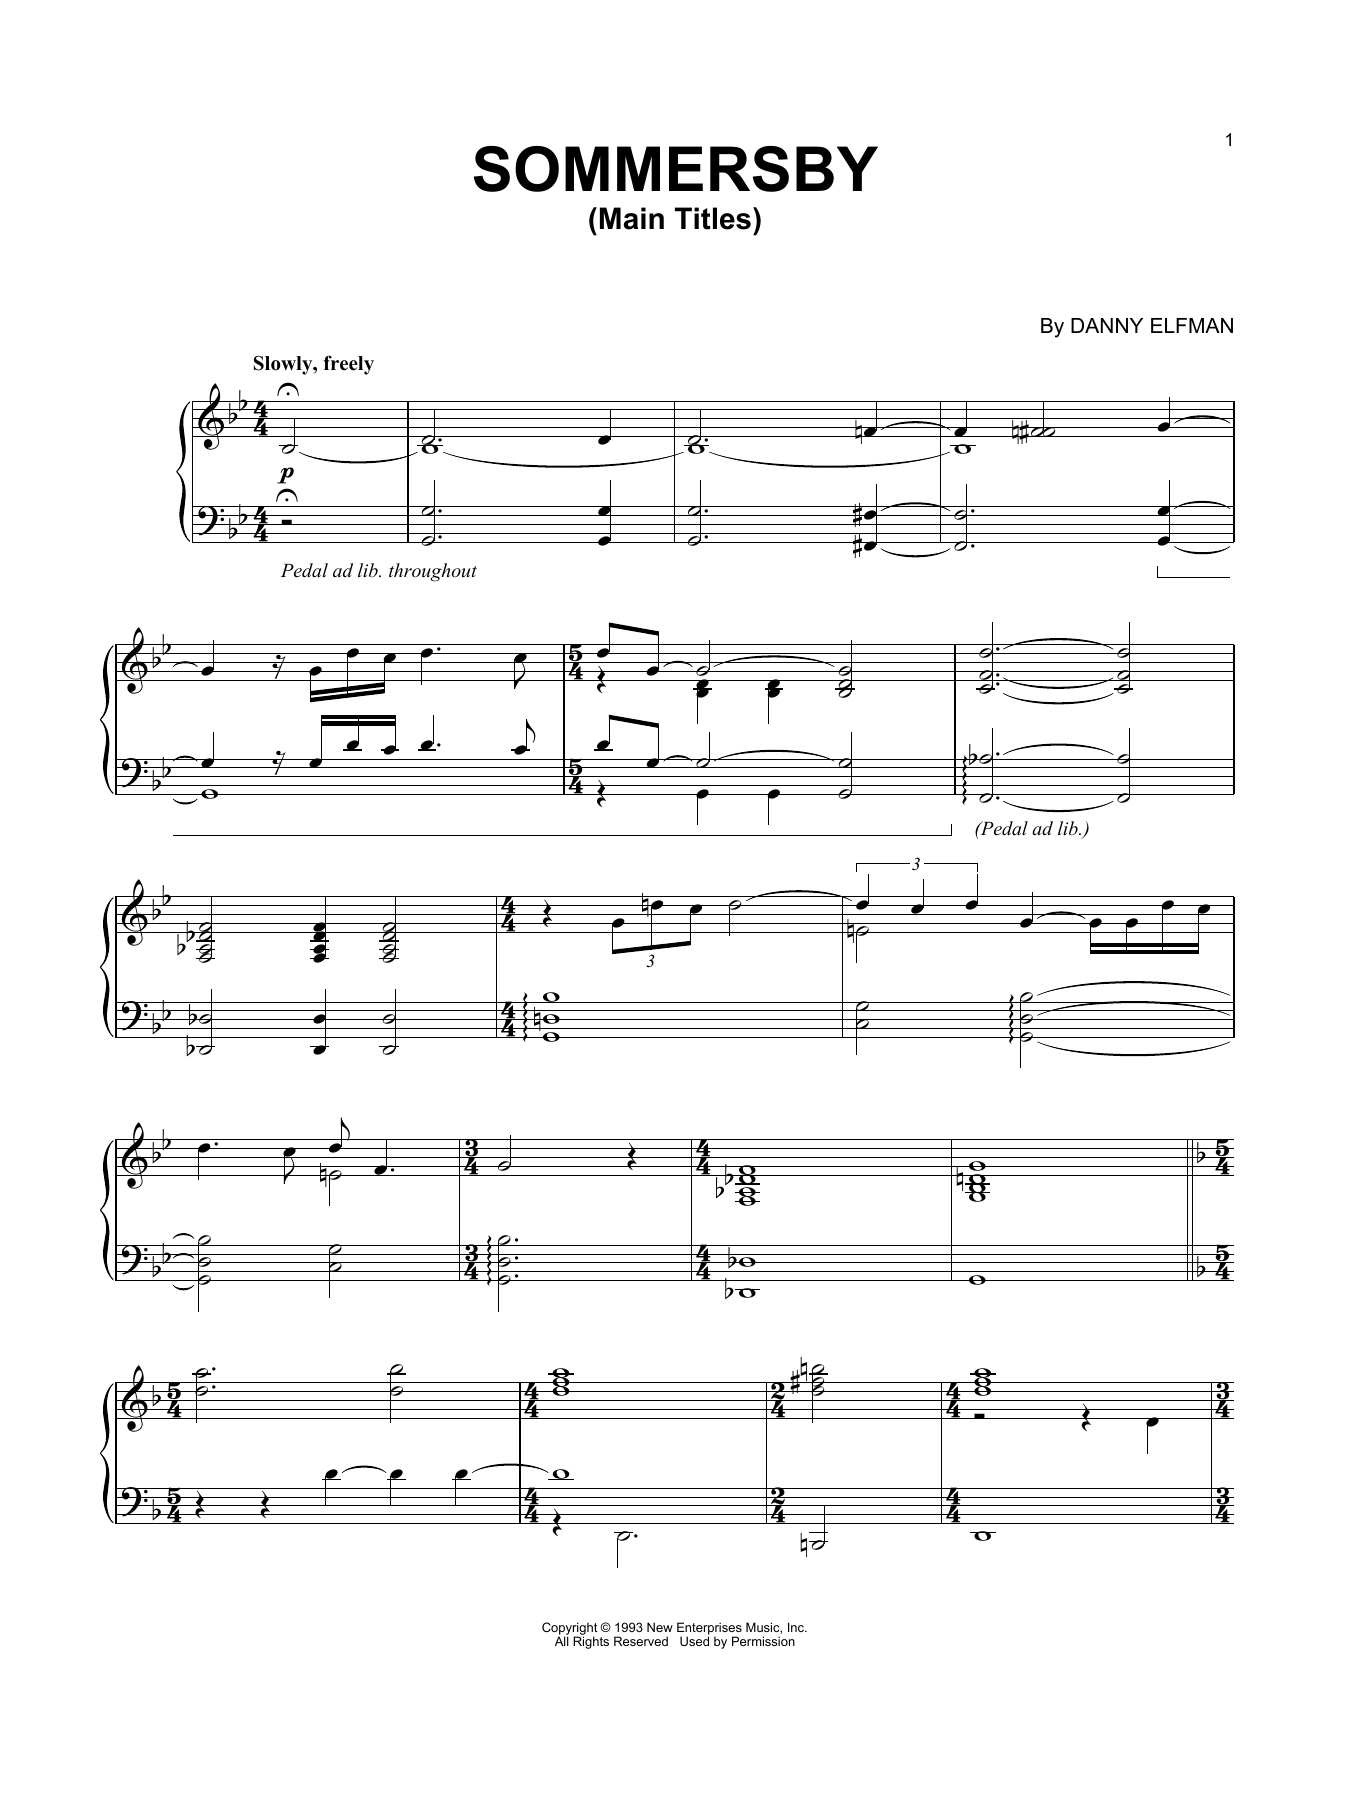 Download Danny Elfman Sommersby - Main Titles Sheet Music